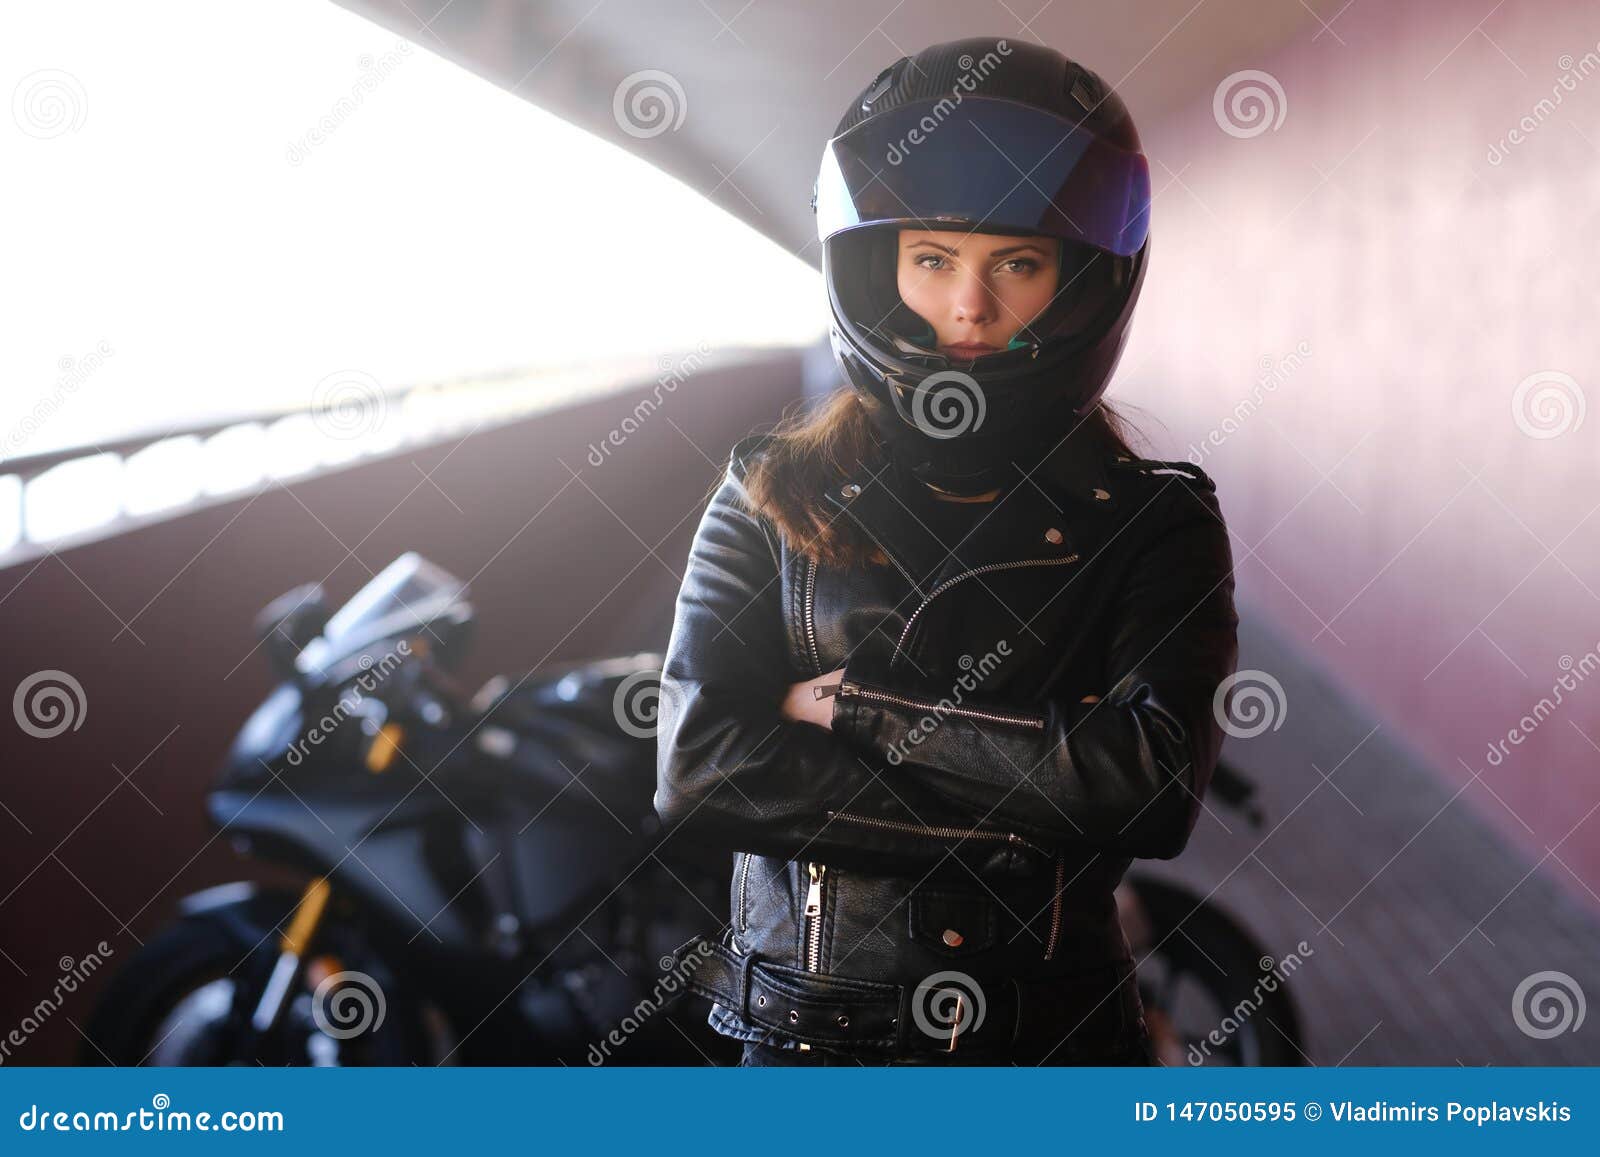 attractive serious woman is standing next to her motobike crossing hands